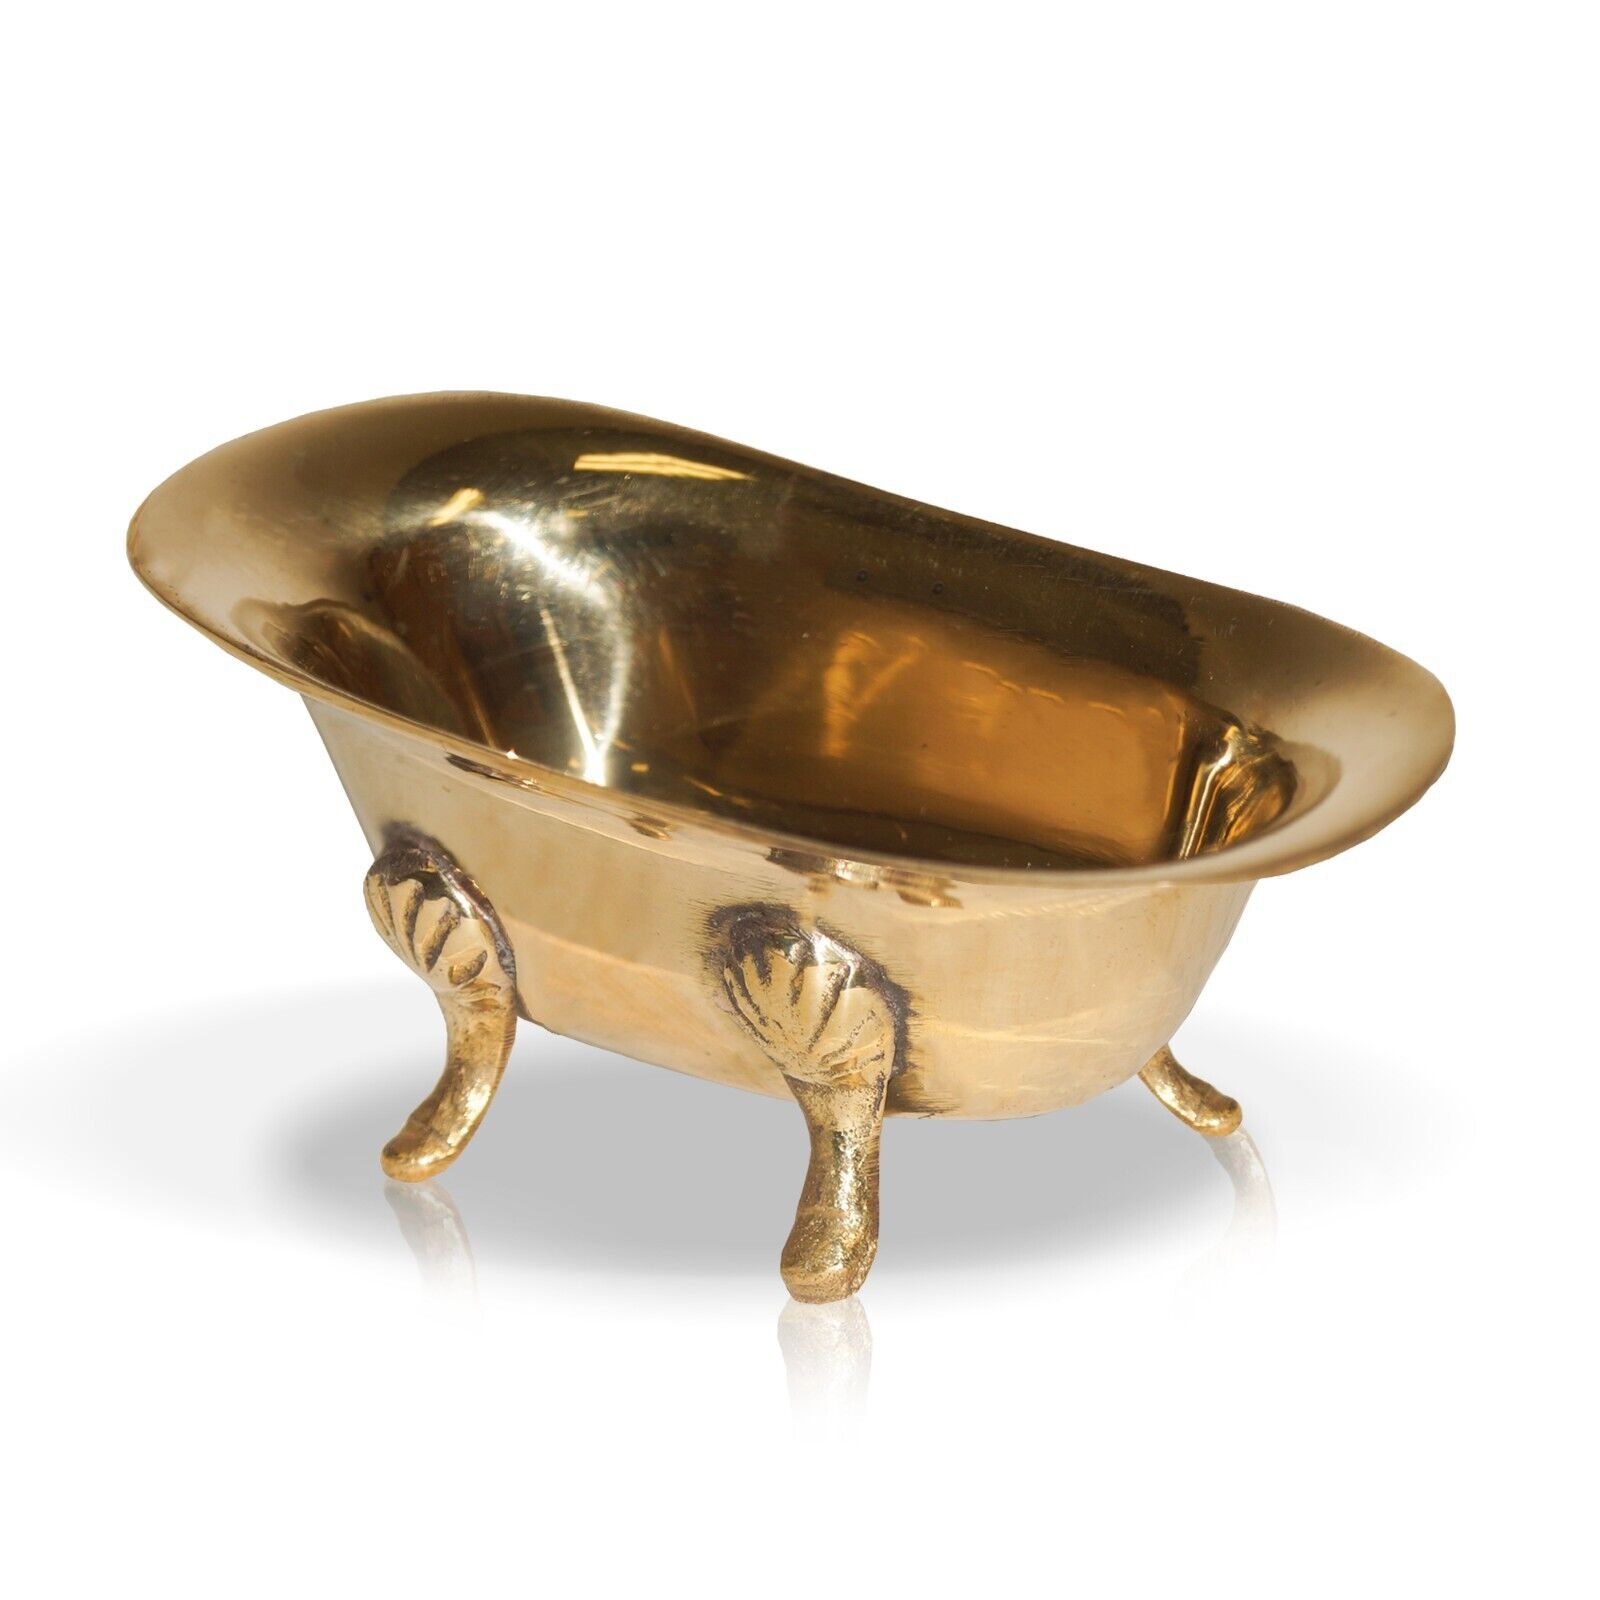 Brass Vintage Golden Soap Dish Miniature Tub Style Tray for Bathroom Counter